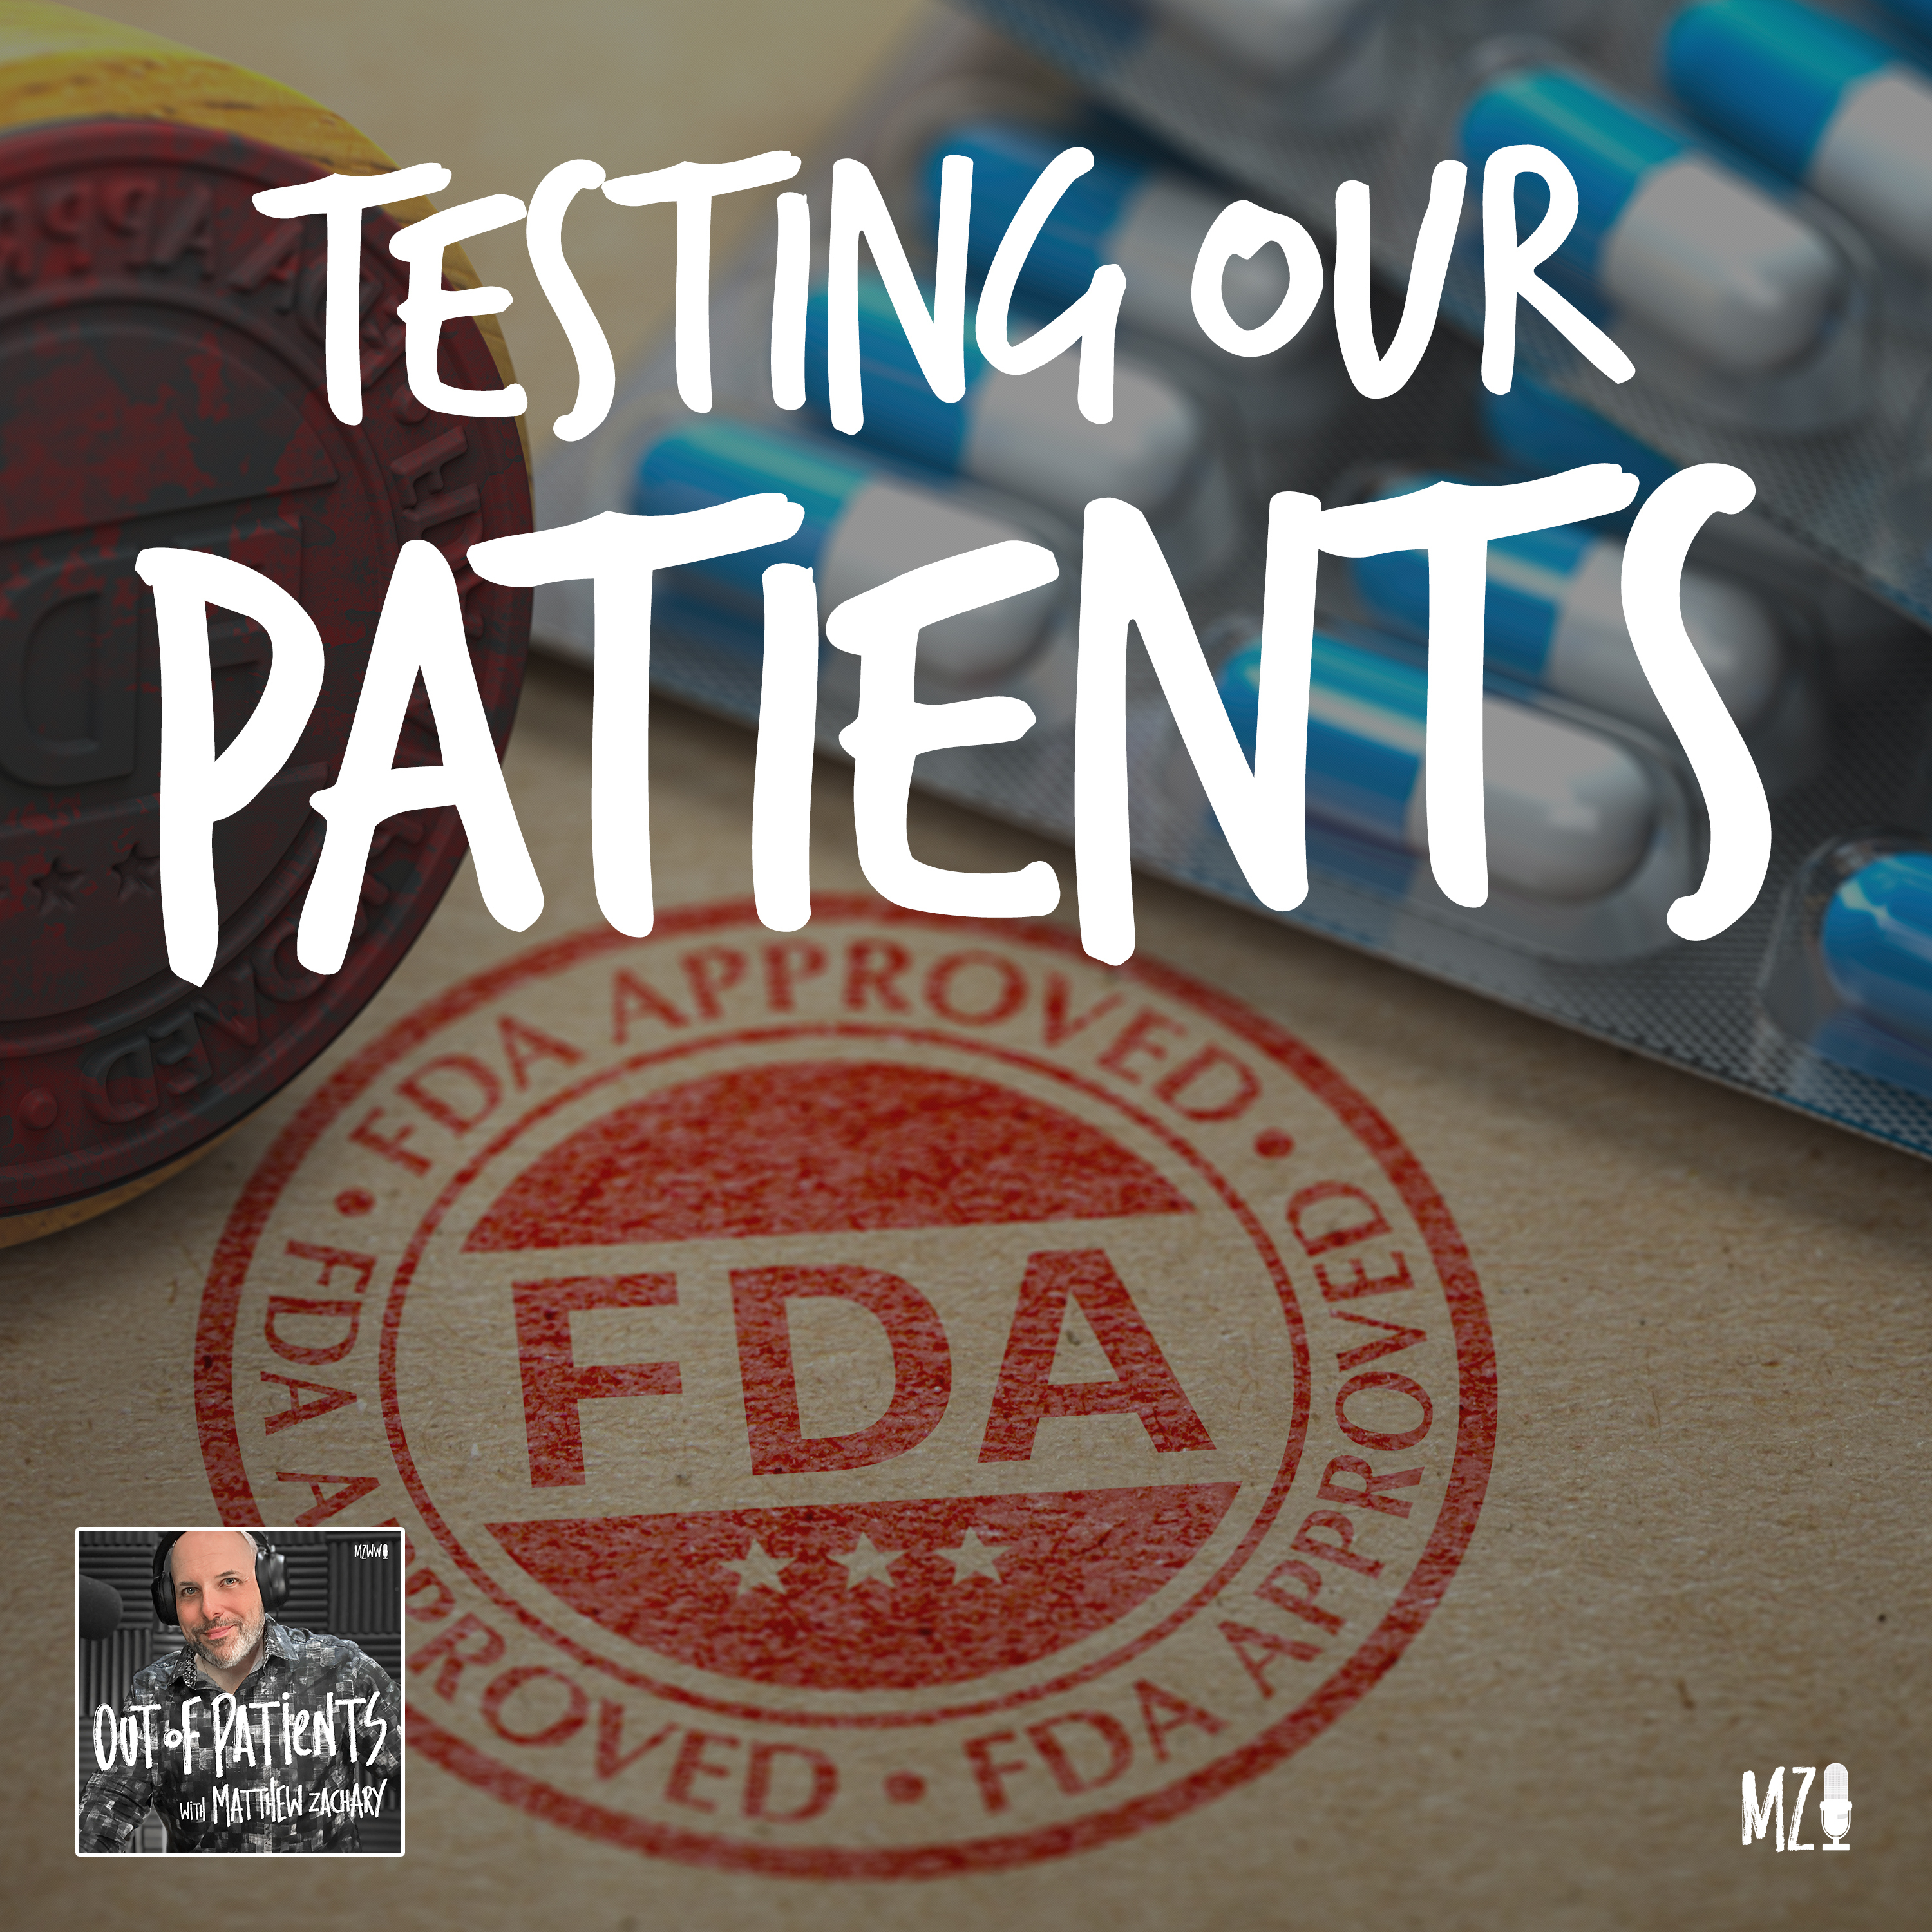 [HIATUS] TESTING OUR PATIENTS:  ”What The FDA?” (Episode Two)